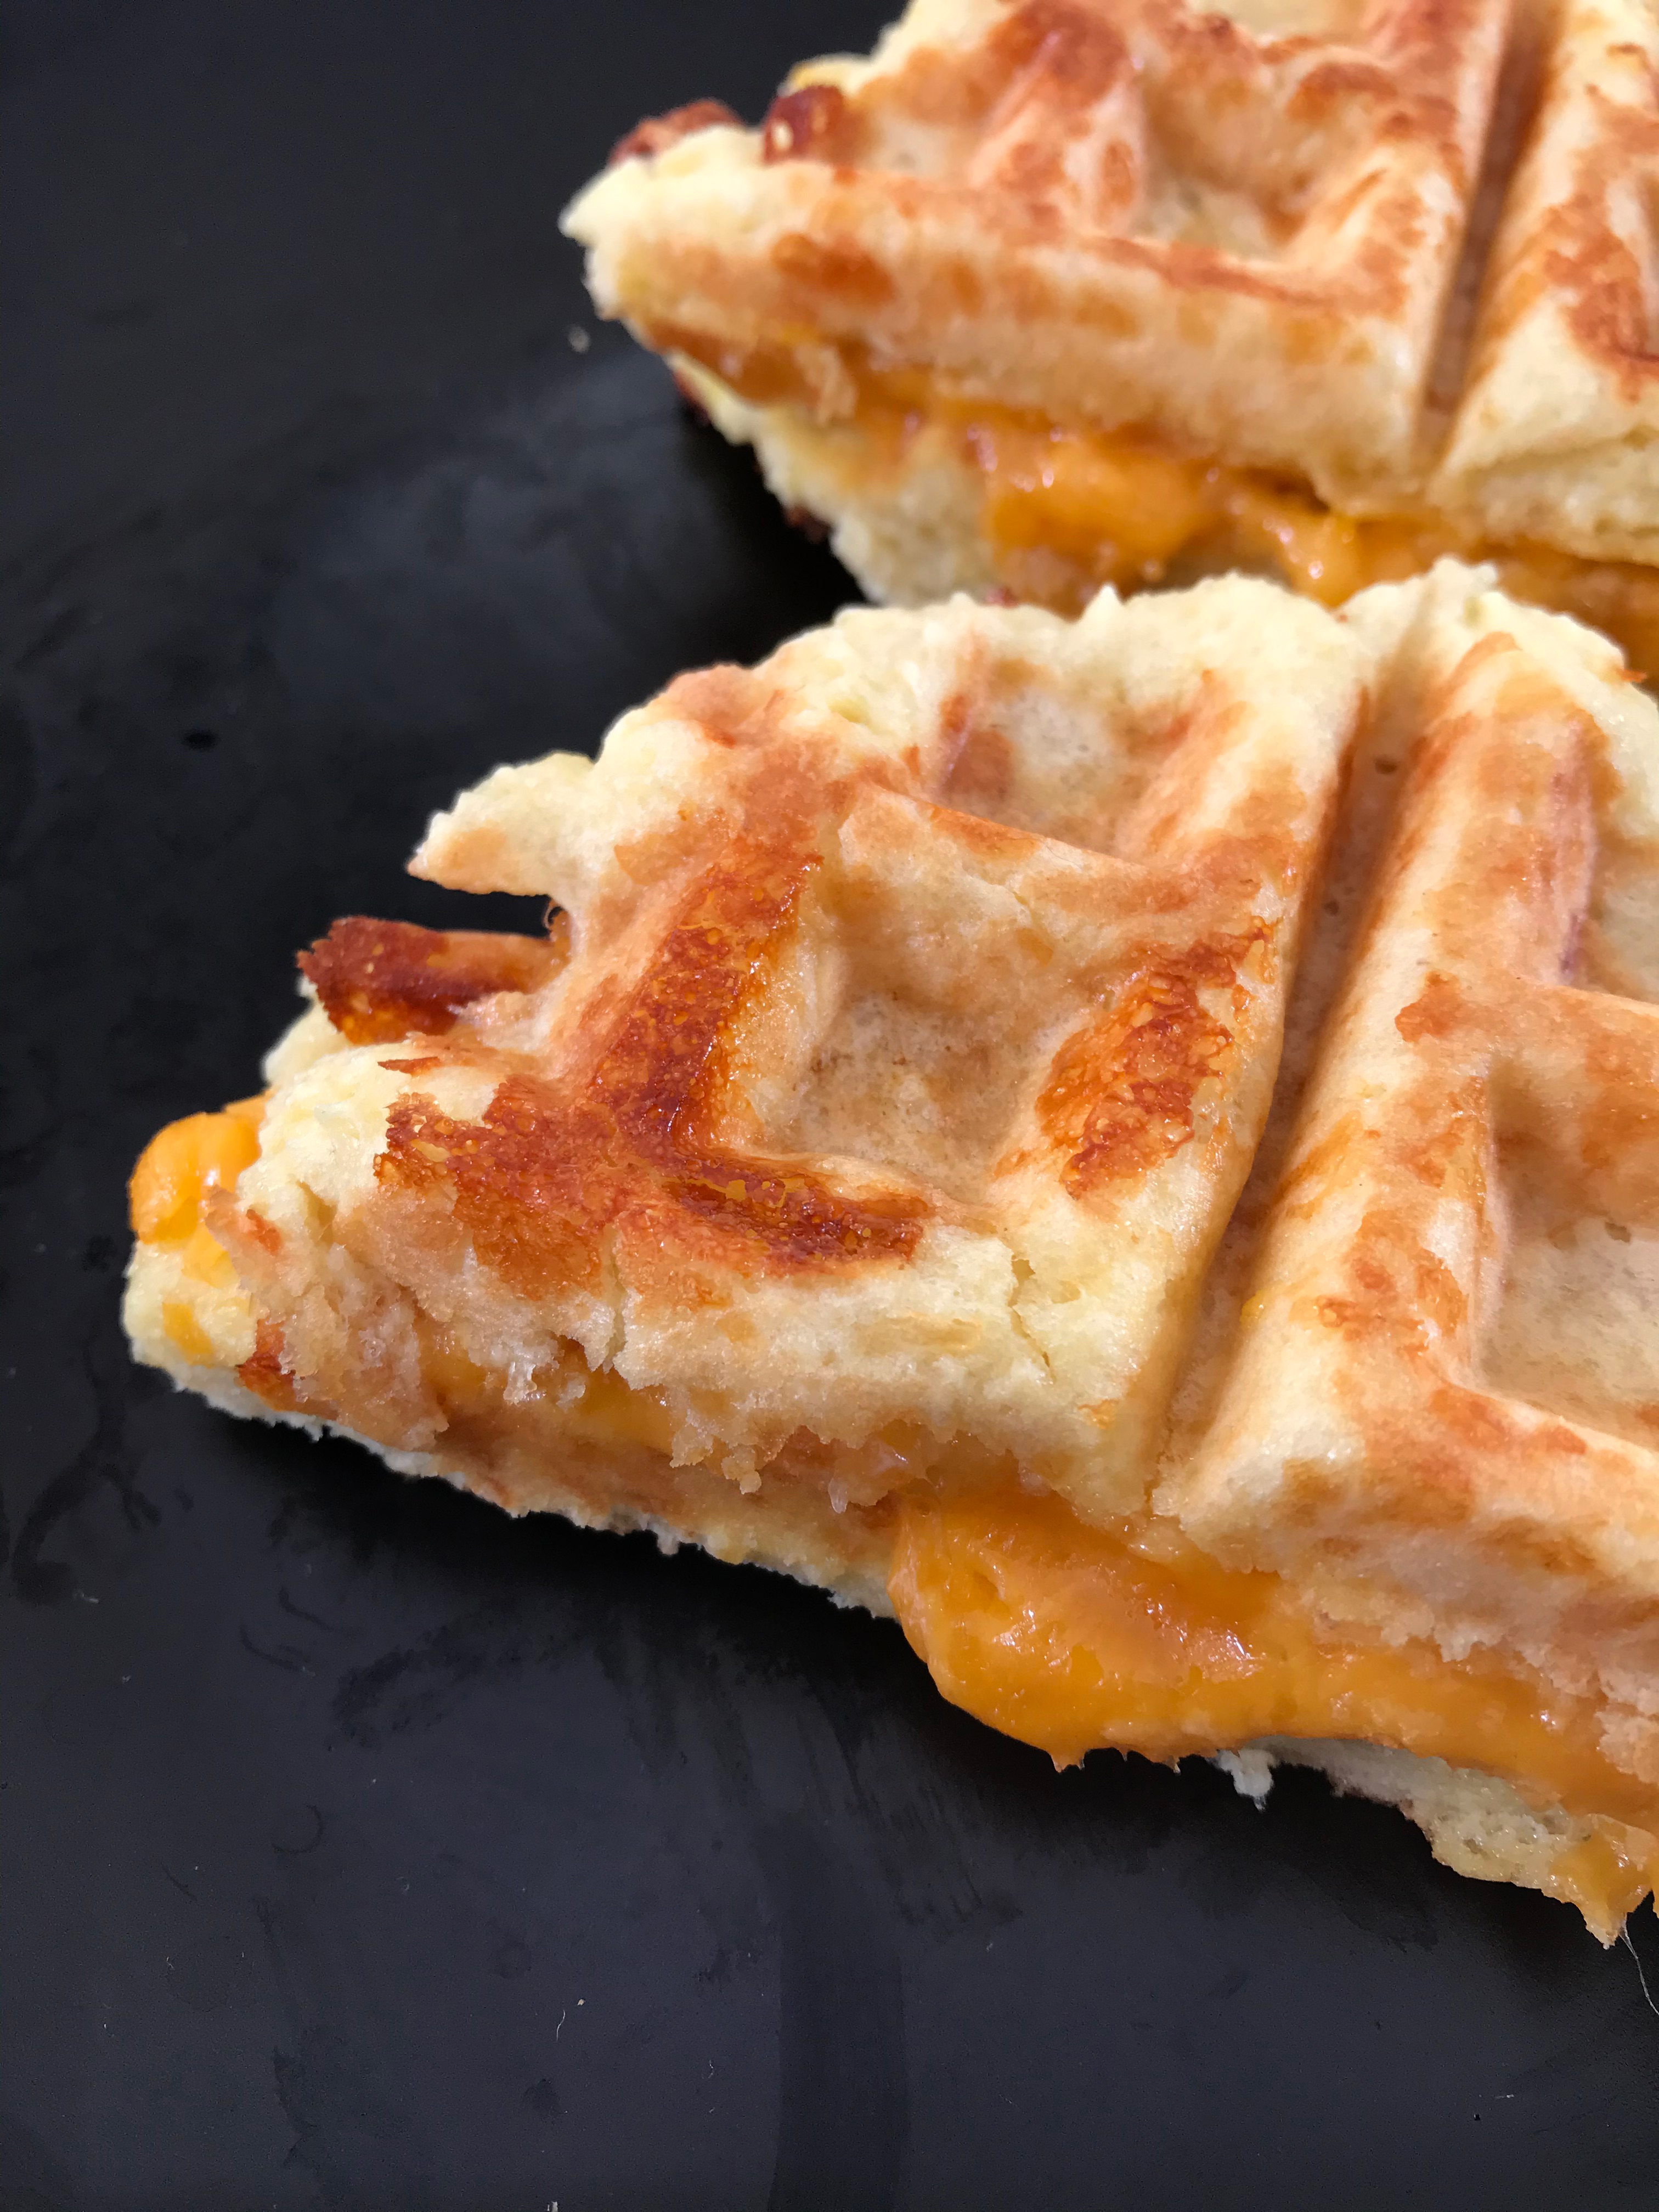 Keto grilled cheese chaffles